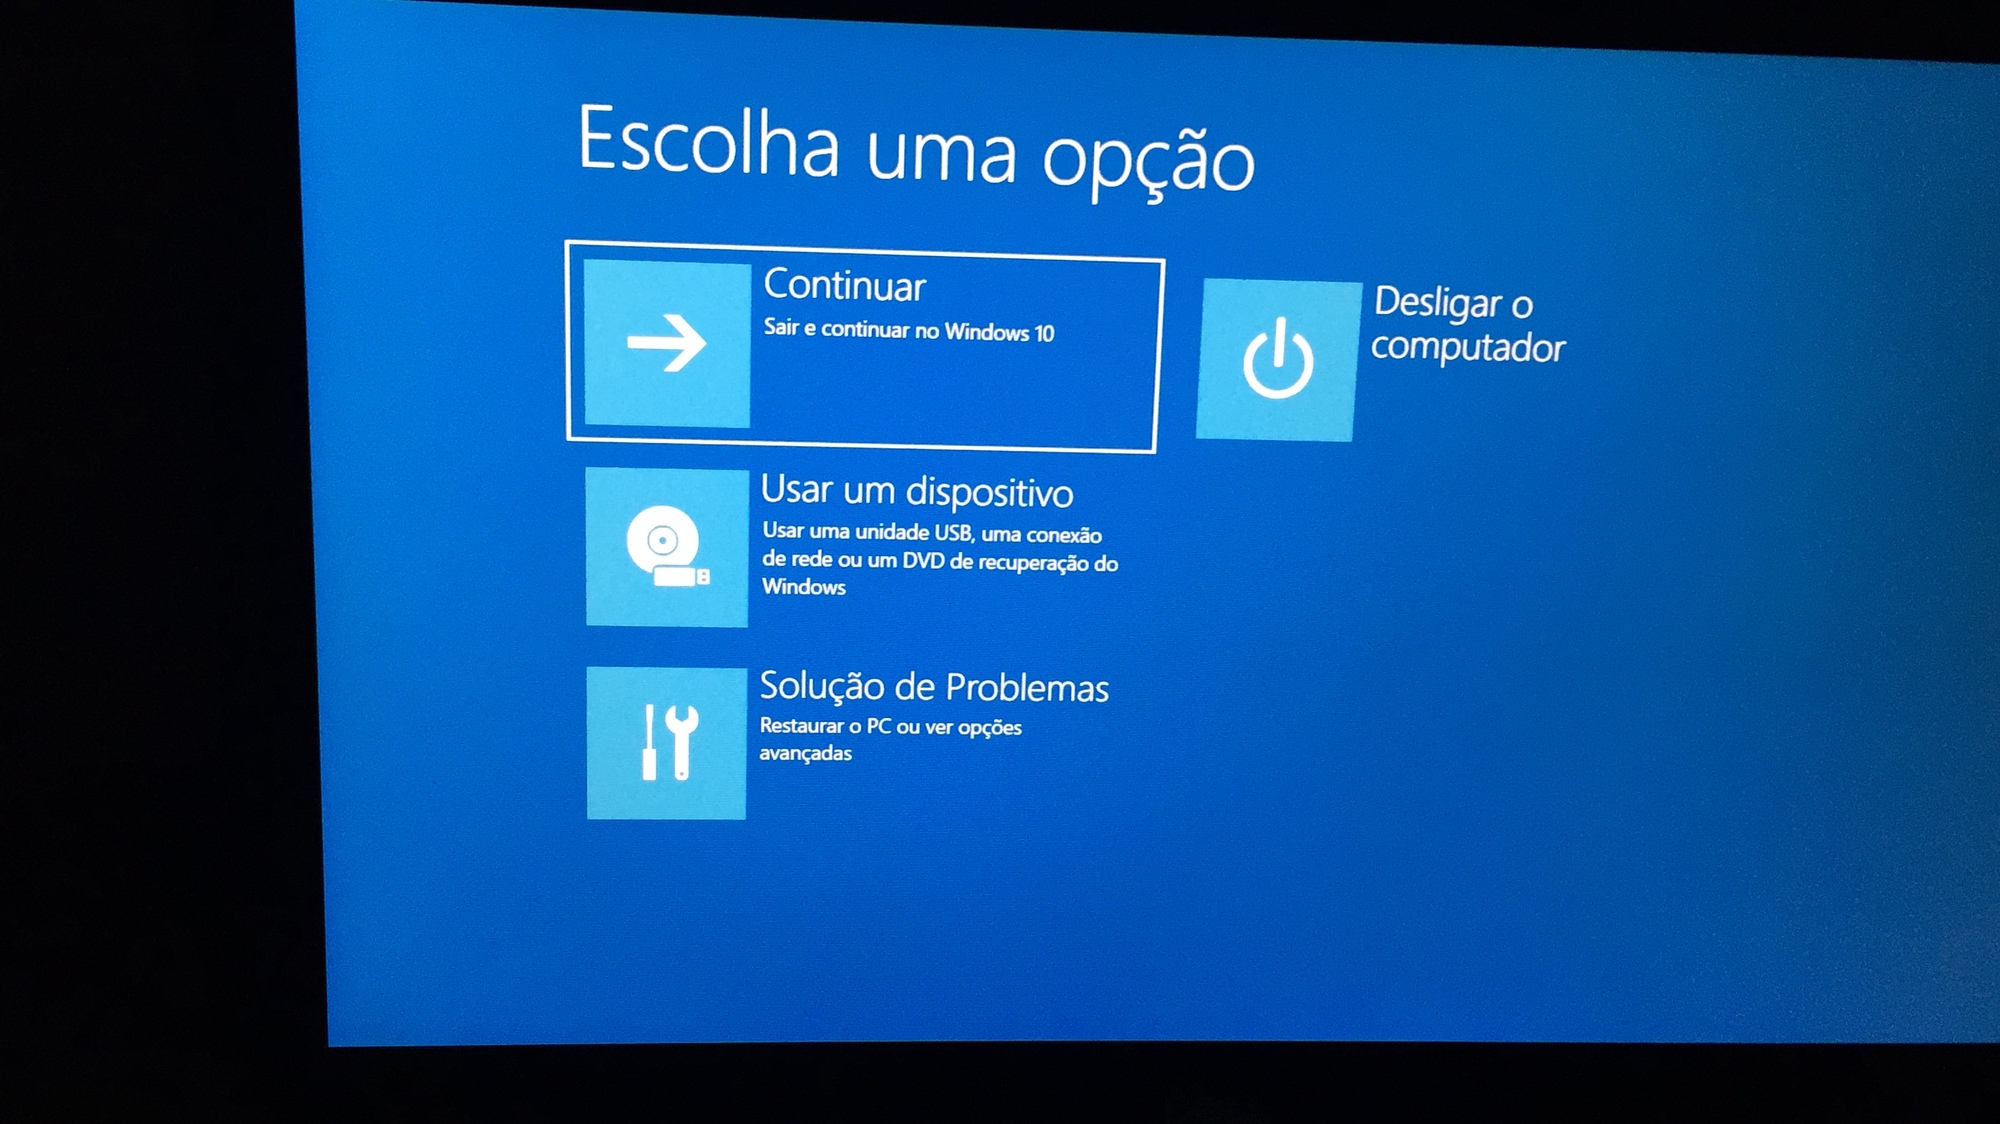 Windows update February/2021 crashed and lead to repair mode and blue screen a1fbdcb3-d437-477d-a9e5-9b26cfbce282?upload=true.jpg